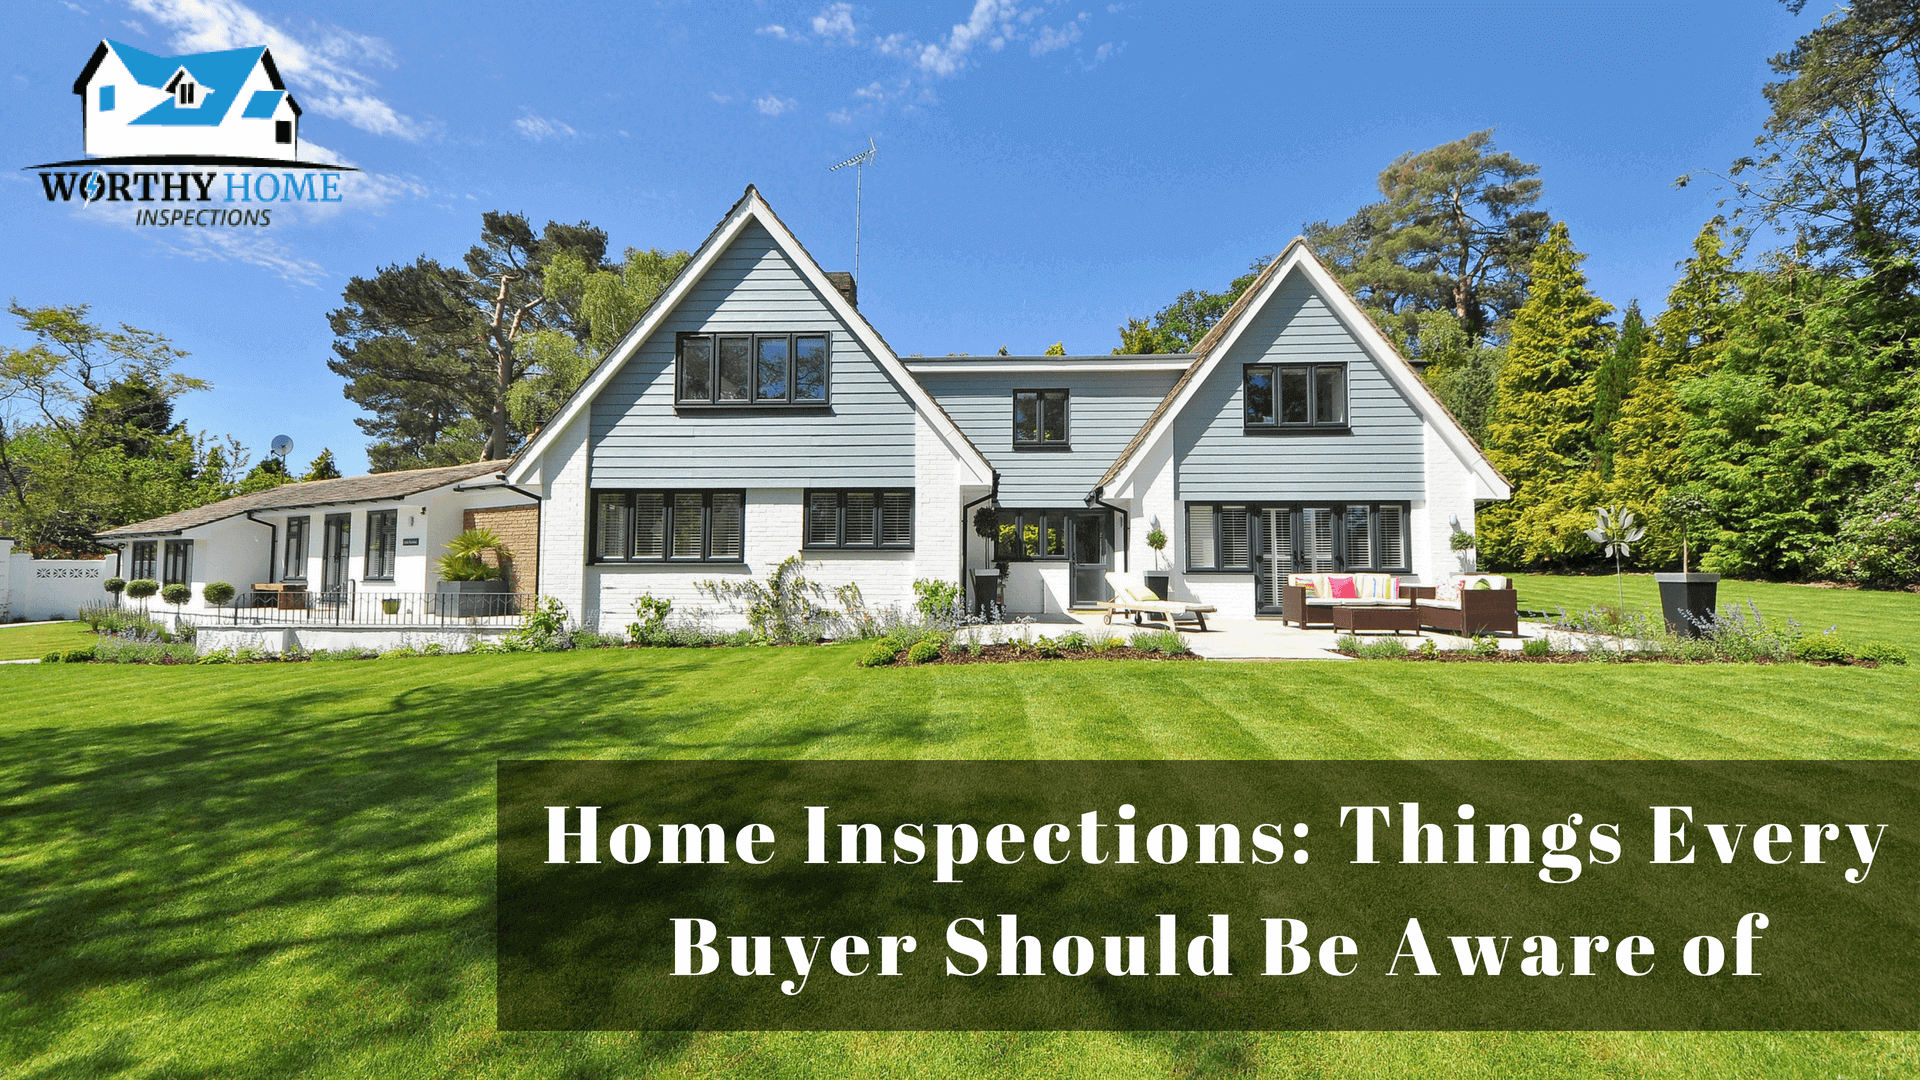 Home Inspections: Things Every Buyer Should Be Aware of